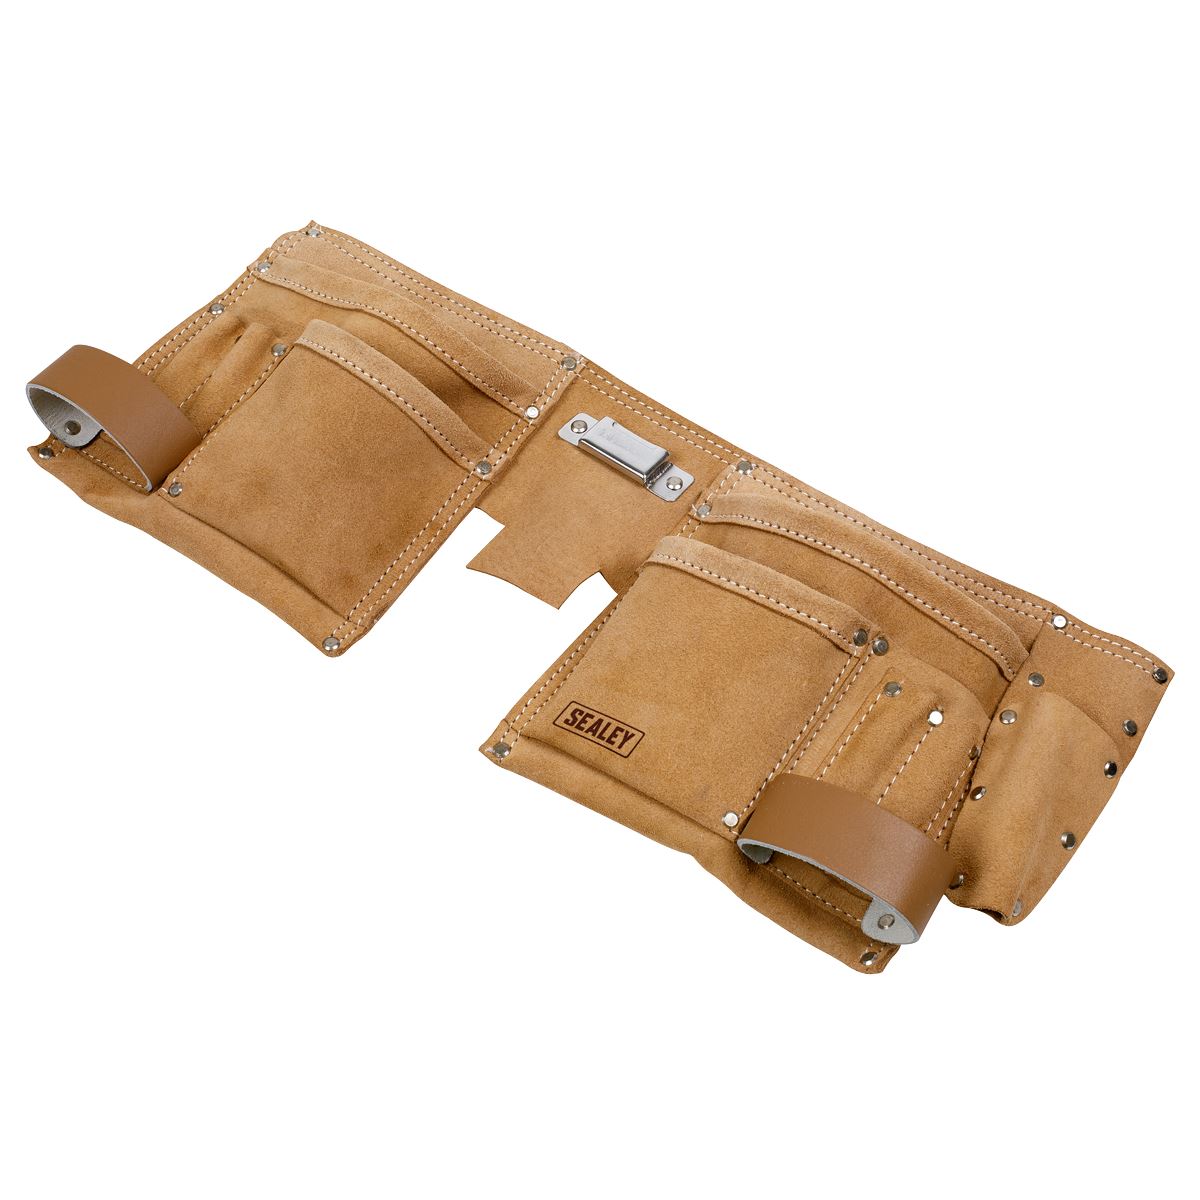 Sealey Double Pouch Leather Tool Belt